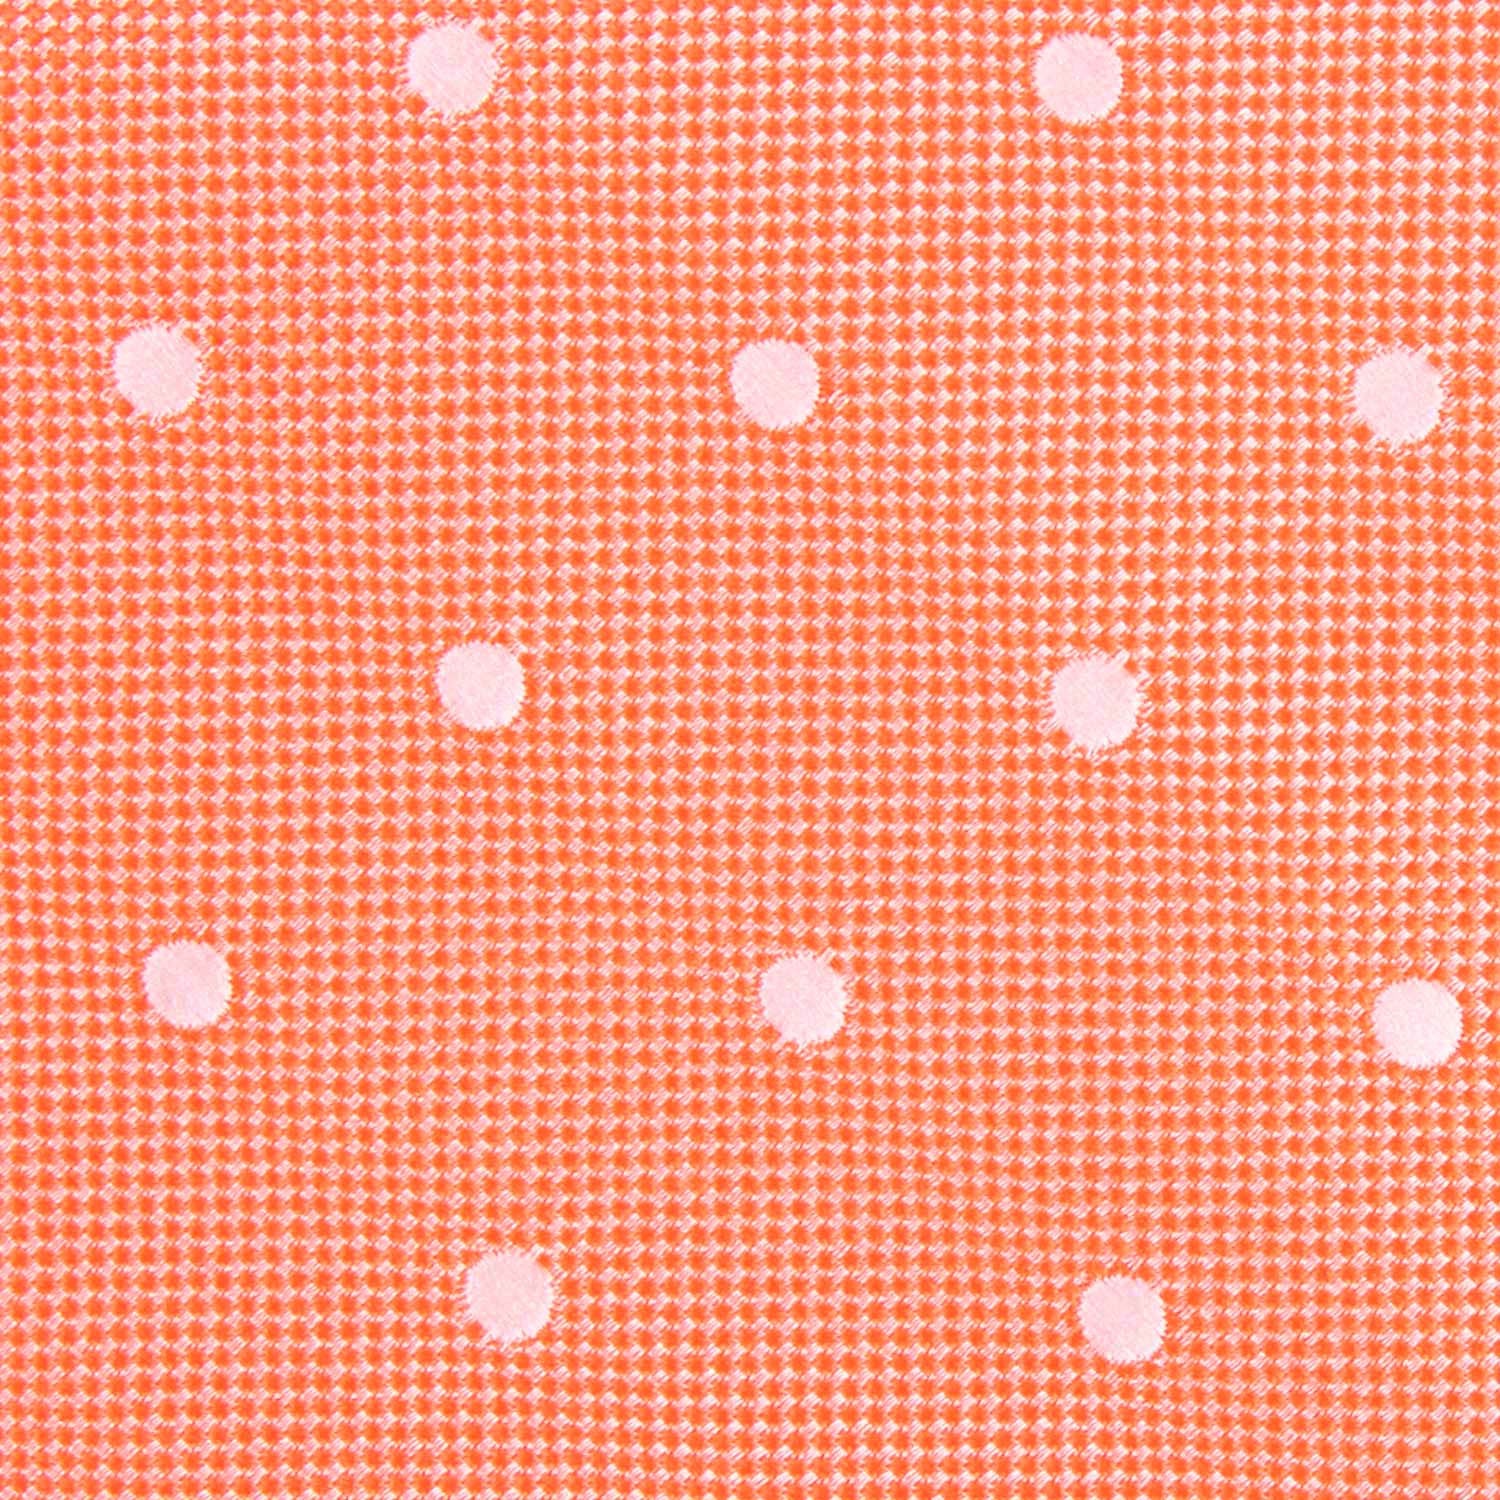 Coral Orange with White Polka Dots Fabric Self Tie Bow Tie M142